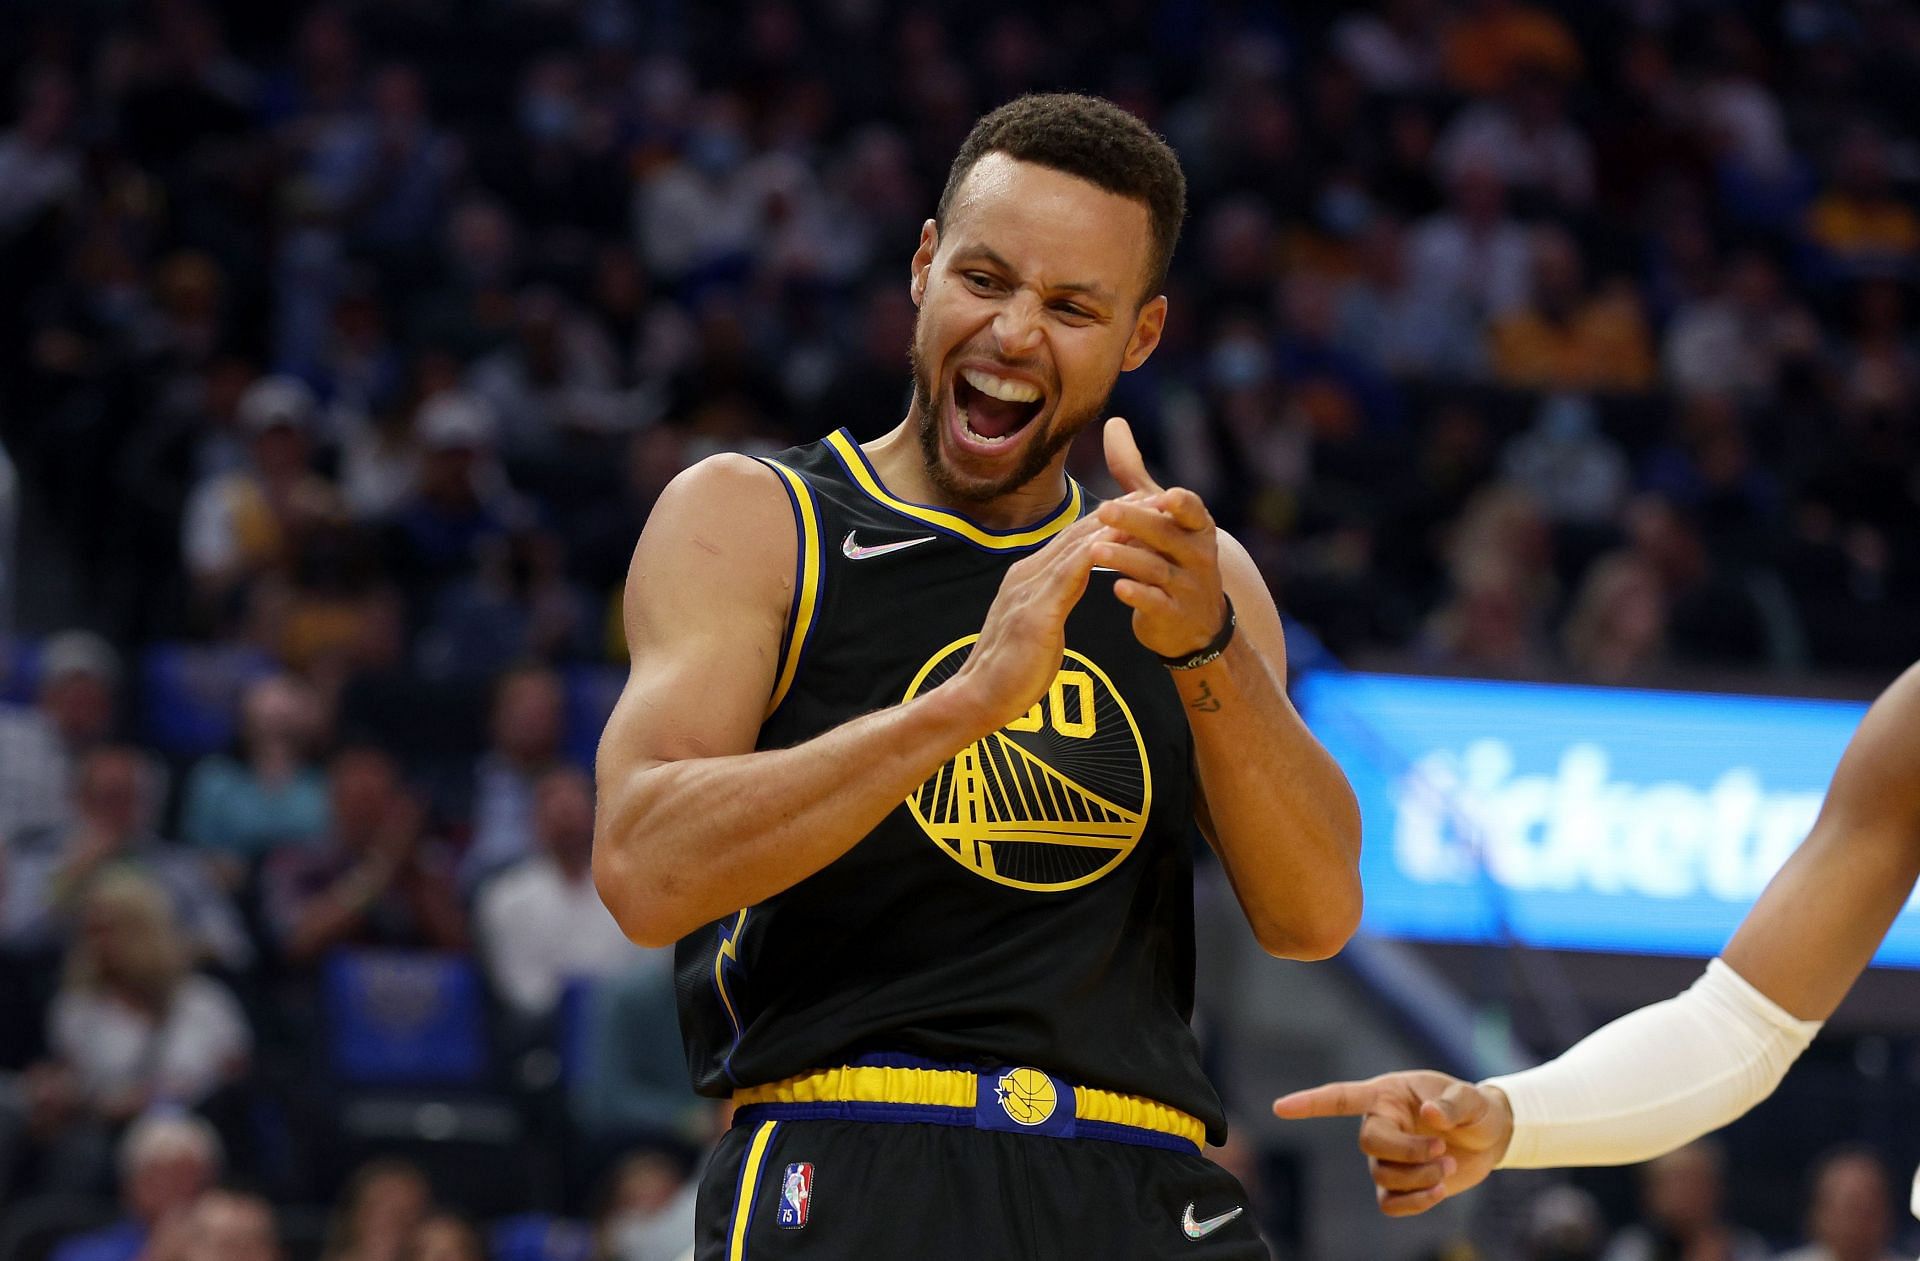 Stephen Curry of the Golden State Warriors celebrates during a game.